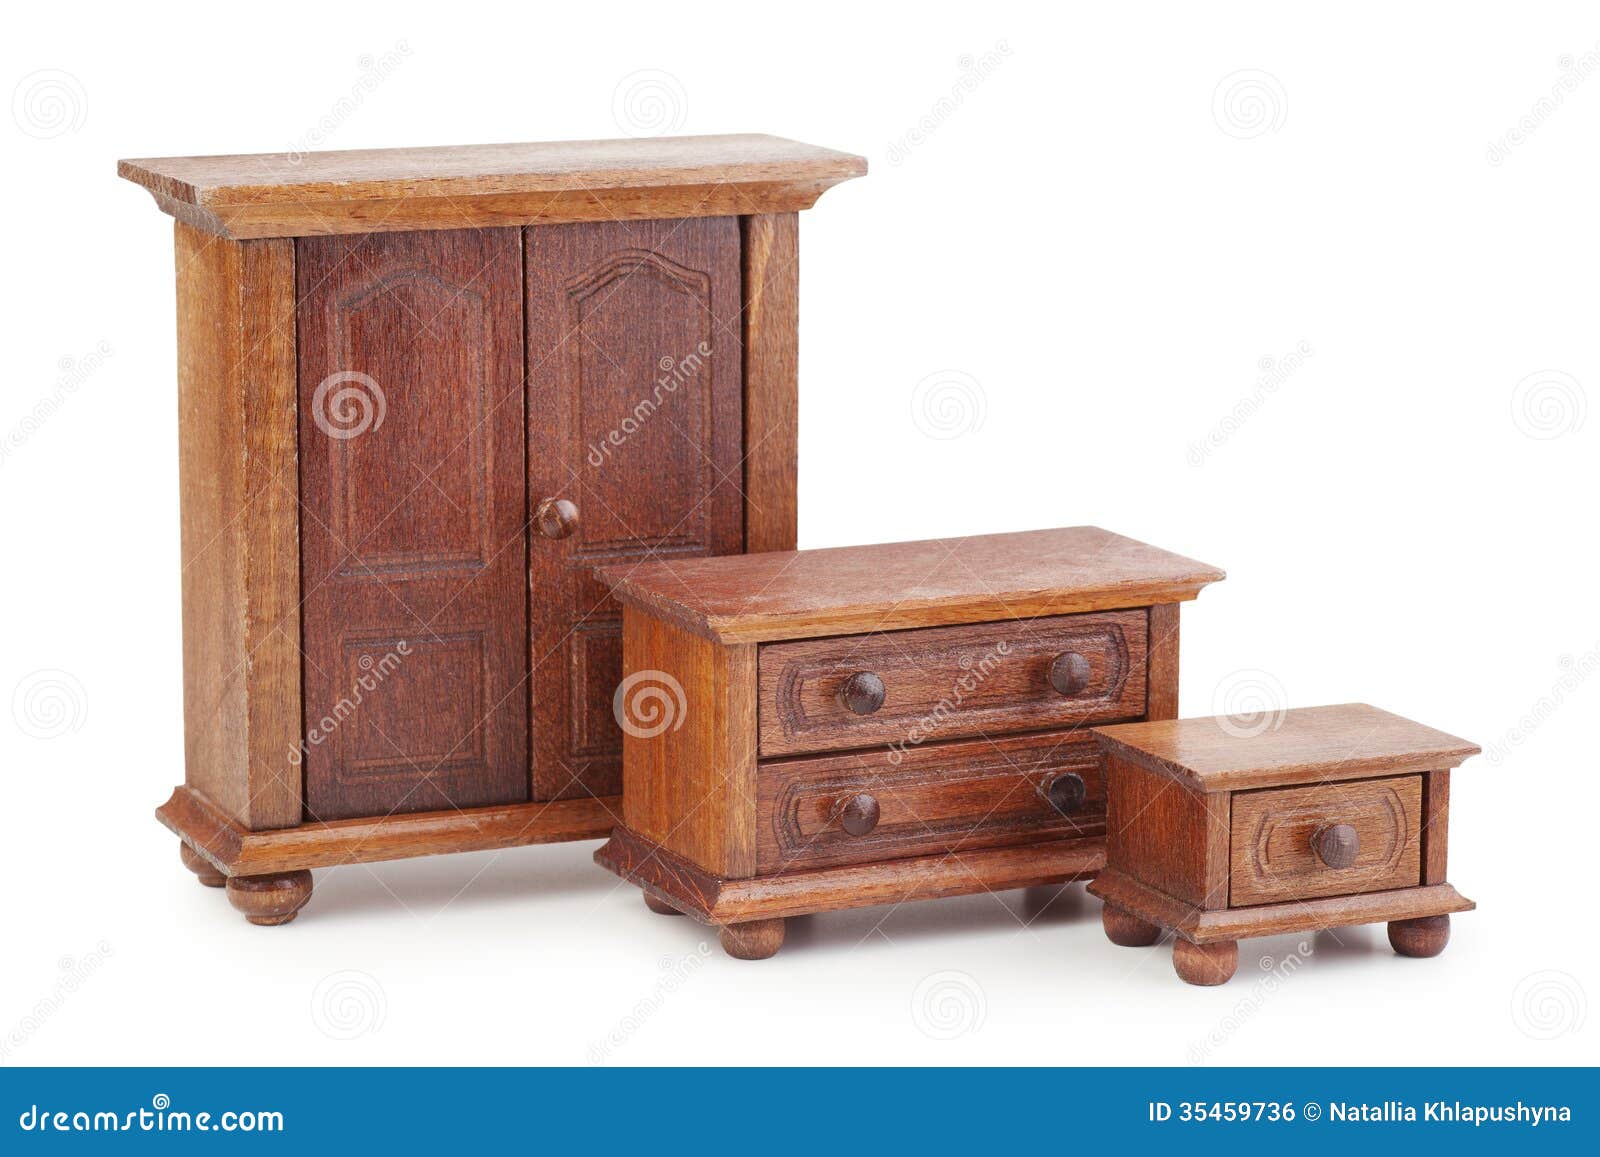 Wooden Doll Furniture